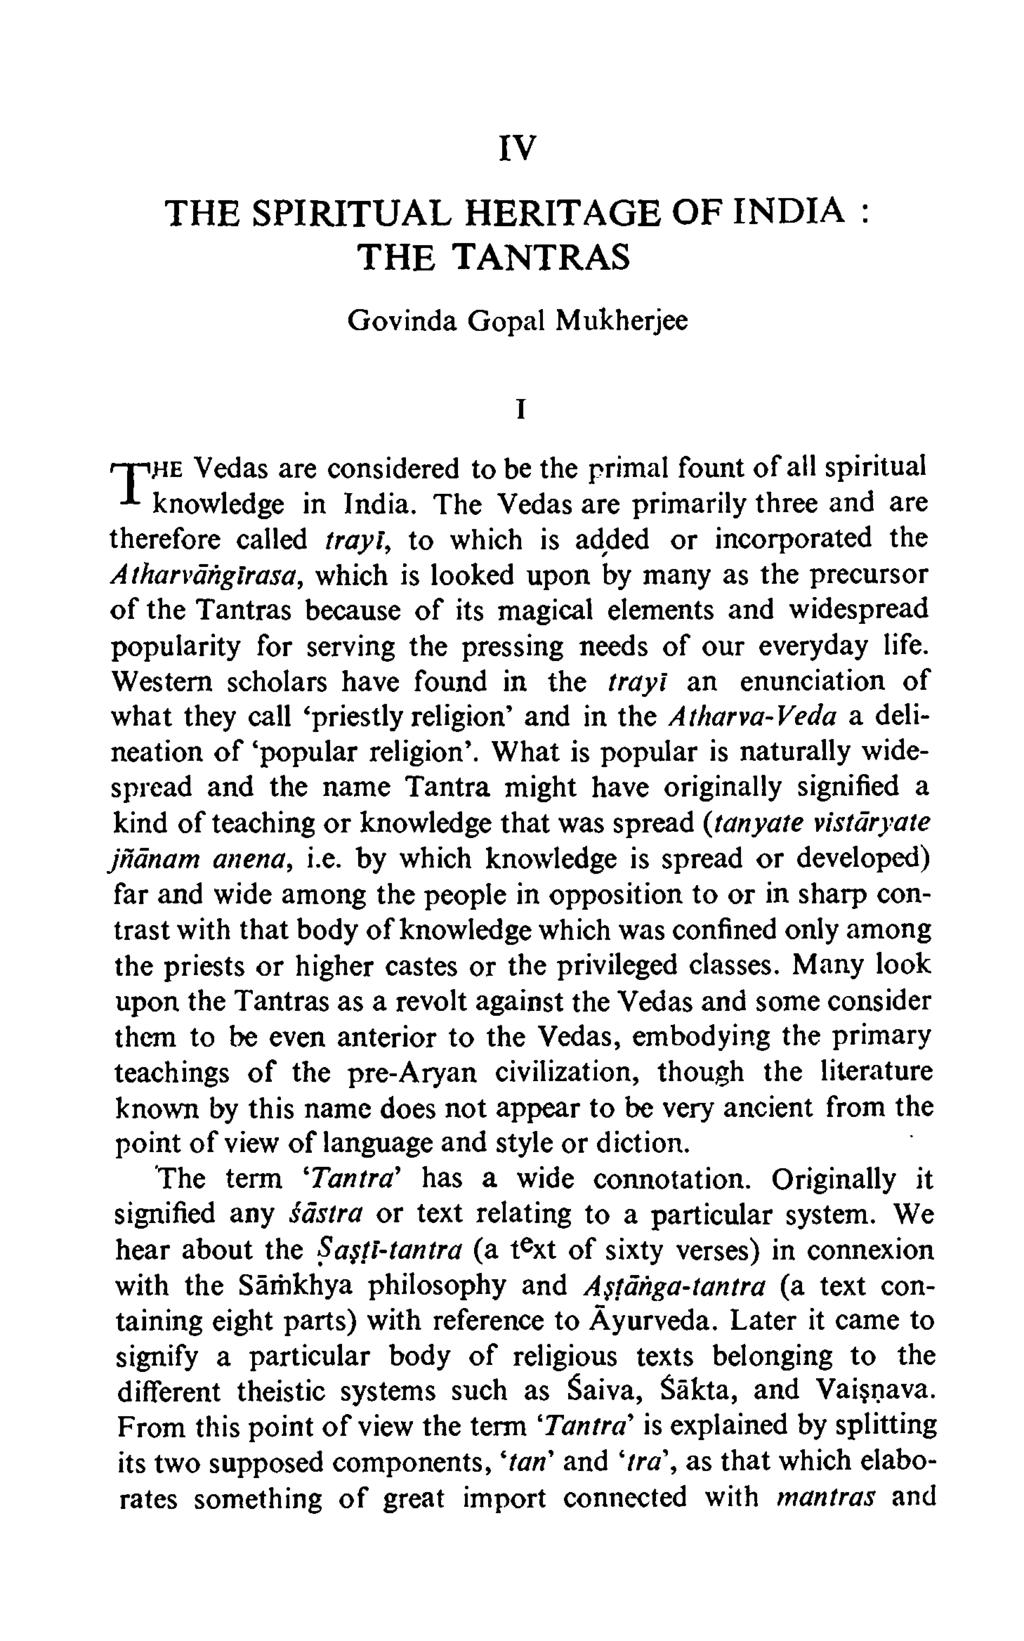 IV THE SPIRITUAL HERITAGE OF INDIA : THE TANTRAS Govinda Gopal Mukherjee I nrute Vedas are considered to be the primal fount of all spiritual knowledge in India.